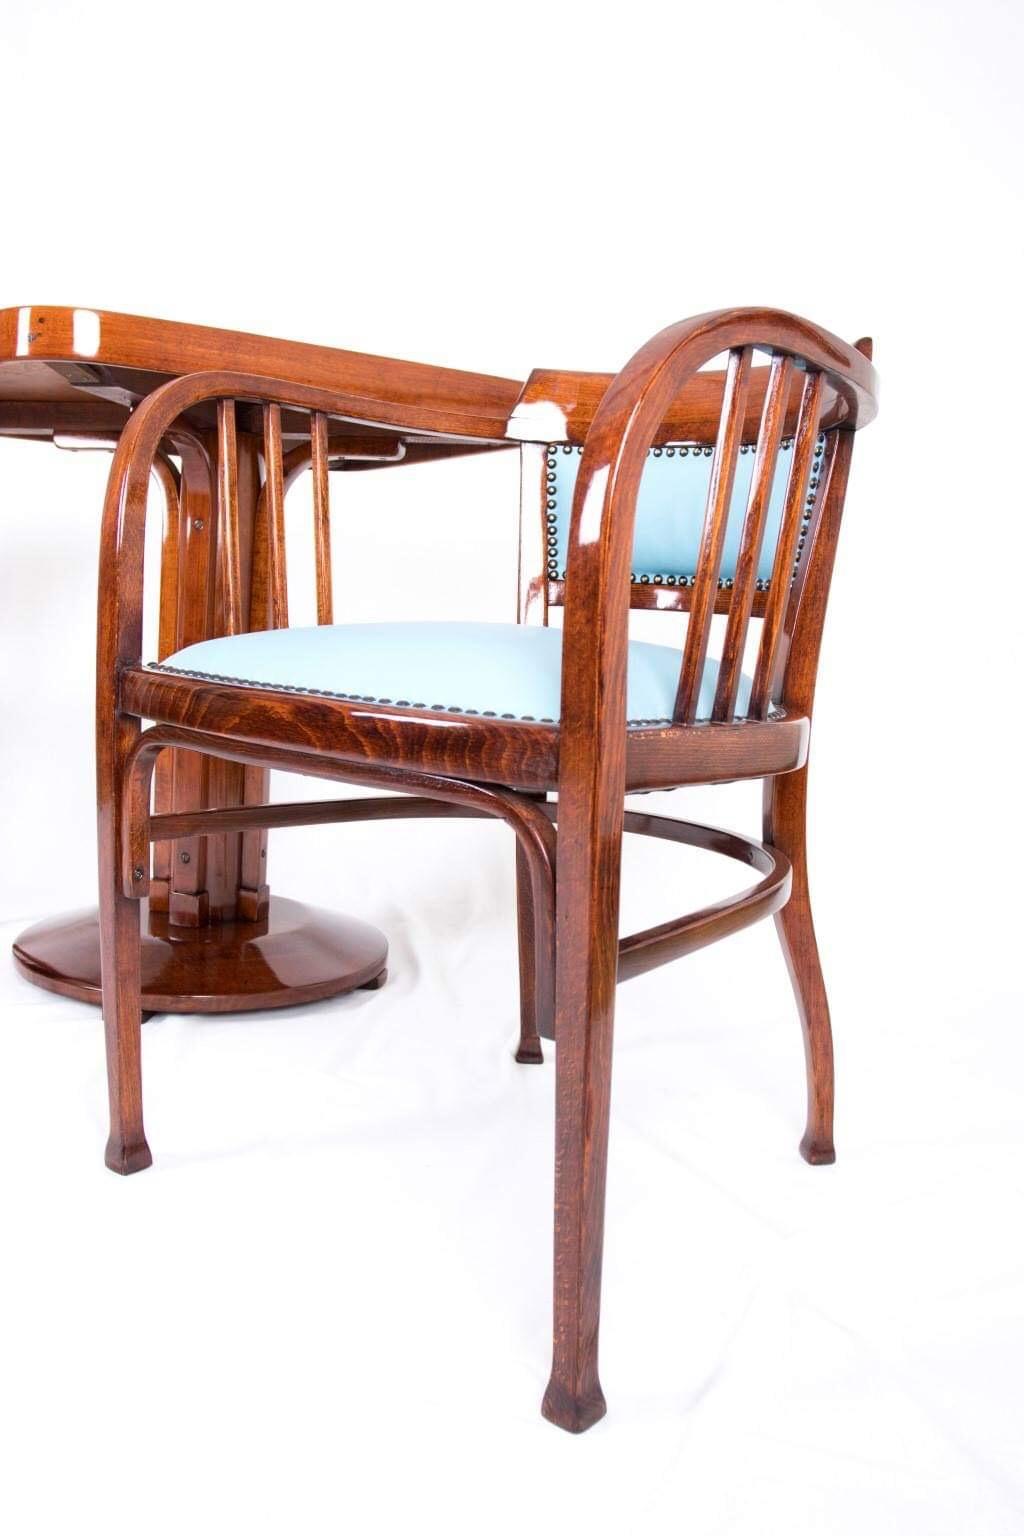 Burnished Art Nouveau Vienna Armchairs Attributed to Otto Wagner Thonet Gebruder